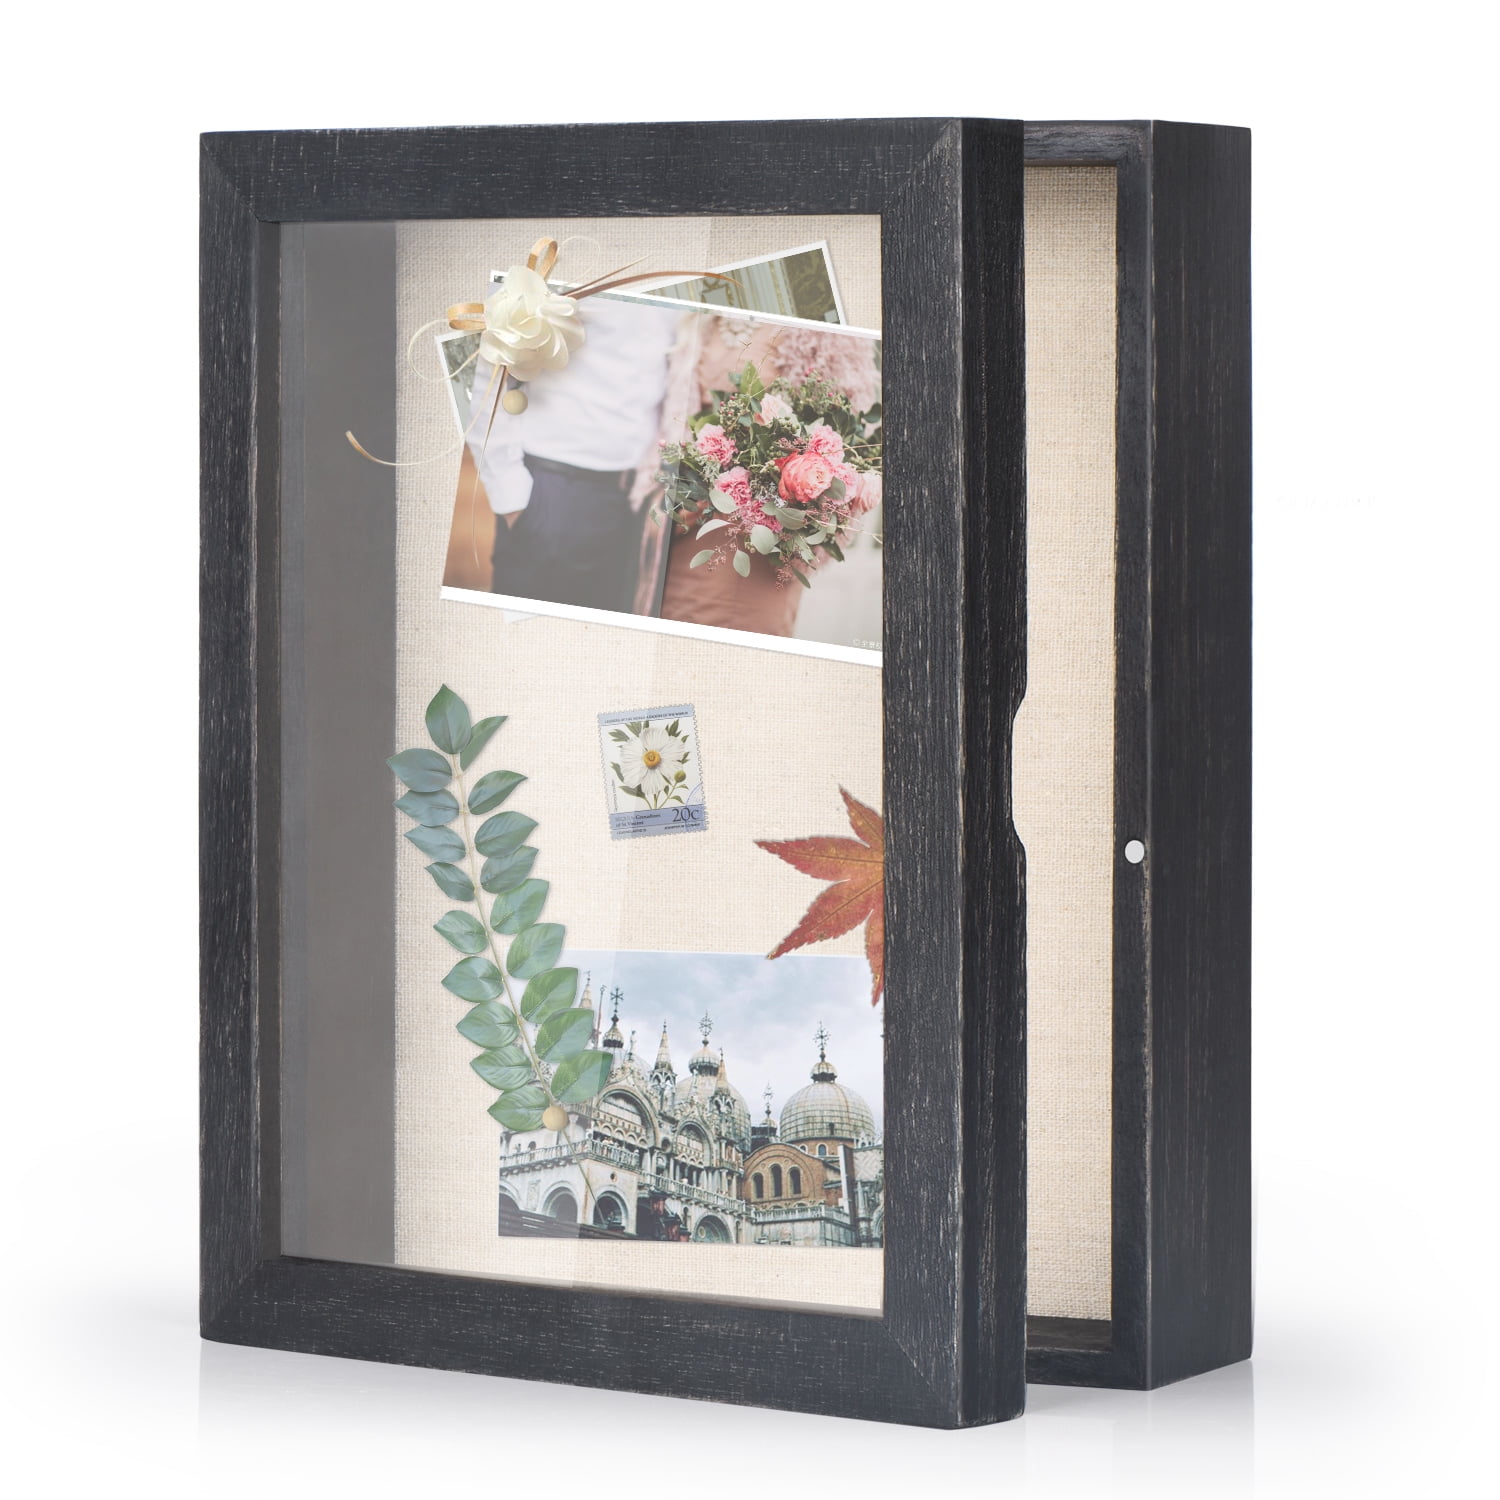 8x8 Shadow Box Frame with Linen Back - Sturdy Rustic Memory Display Case of  Flower, Pictures, Medals and More, Rustic Gray